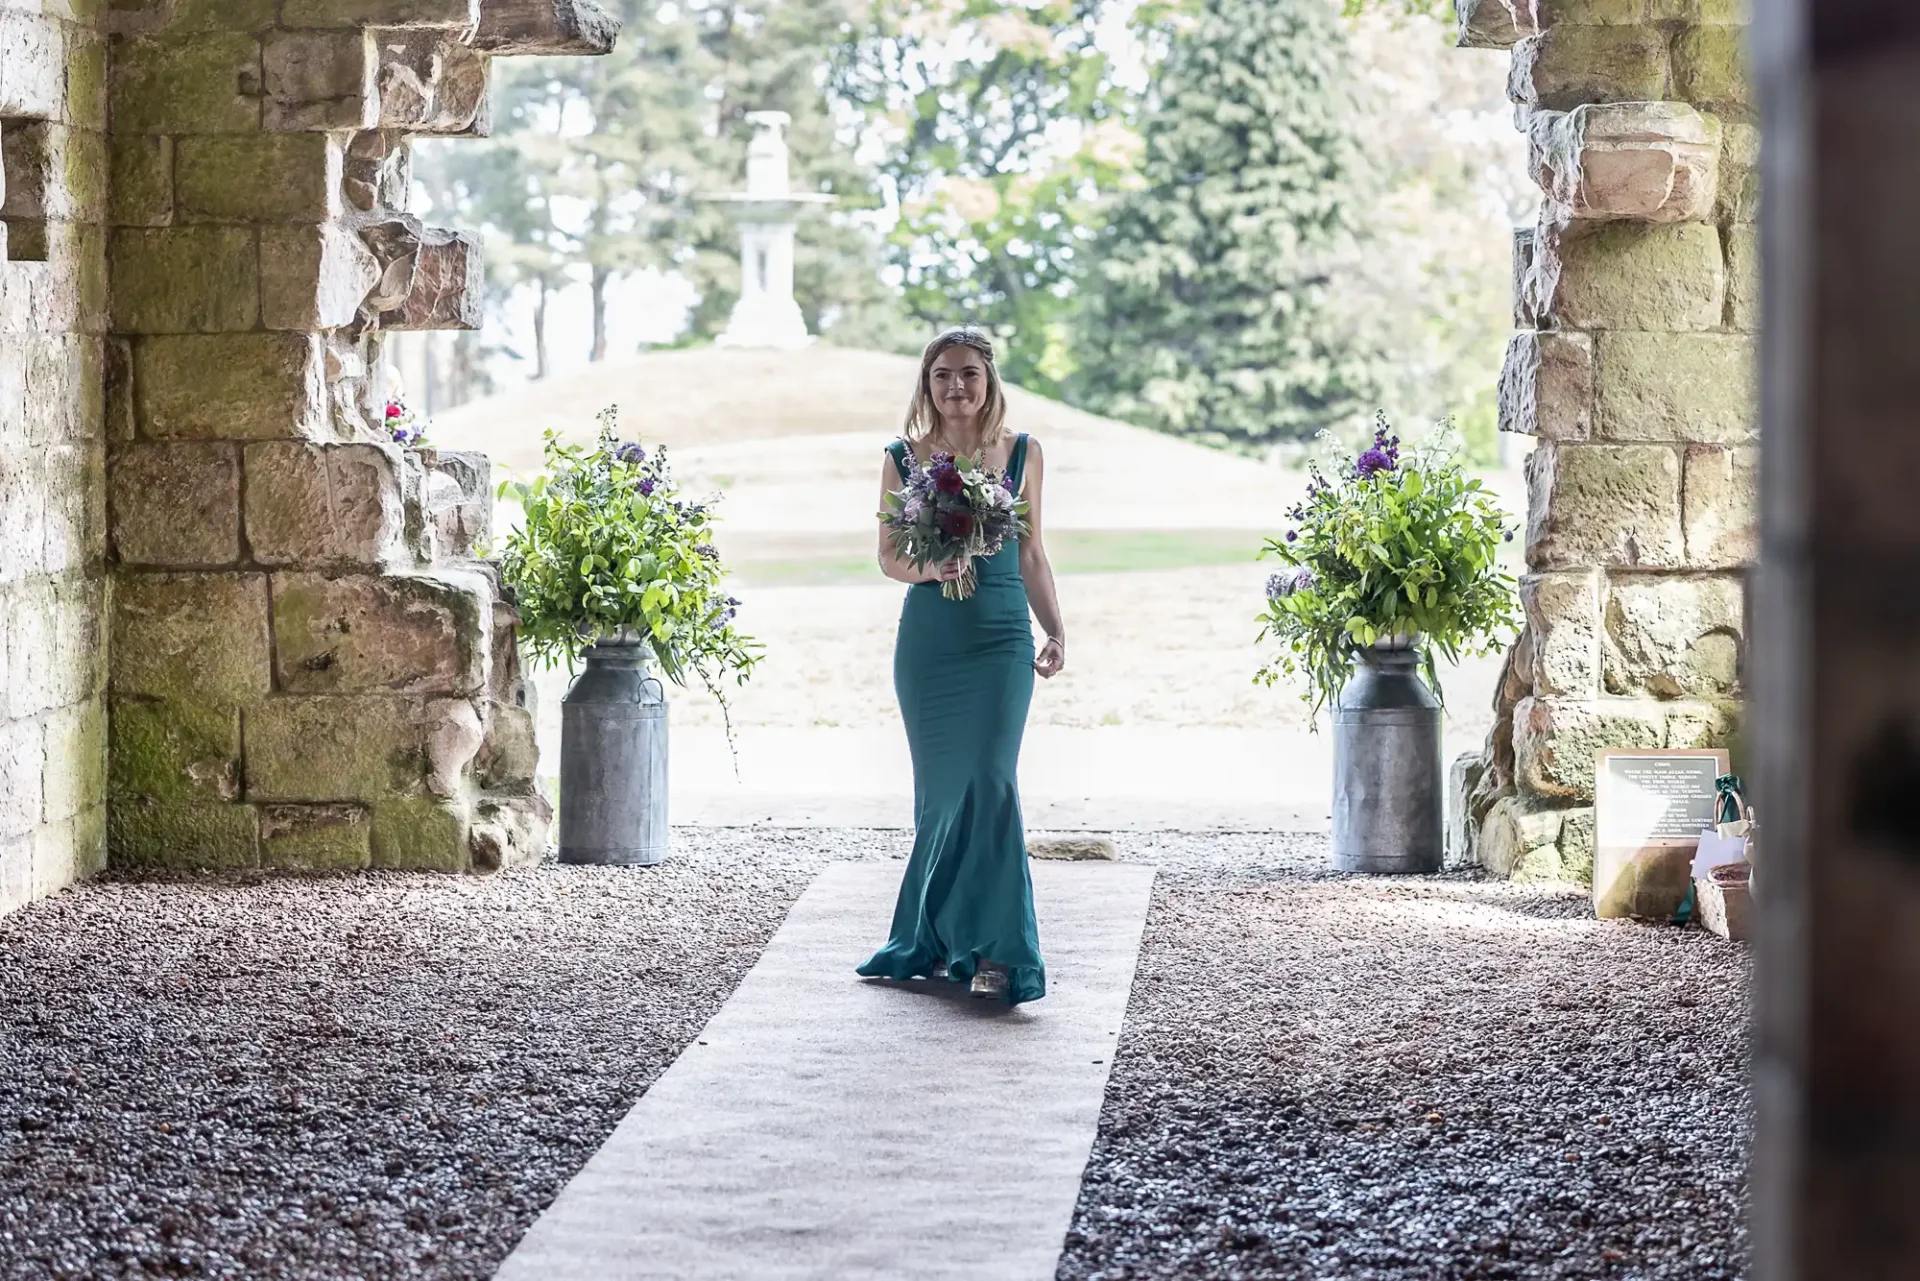 A woman in a teal dress walks down an aisle, holding a bouquet, surrounded by stone walls and large flower arrangements. Outdoor background visible through archway.